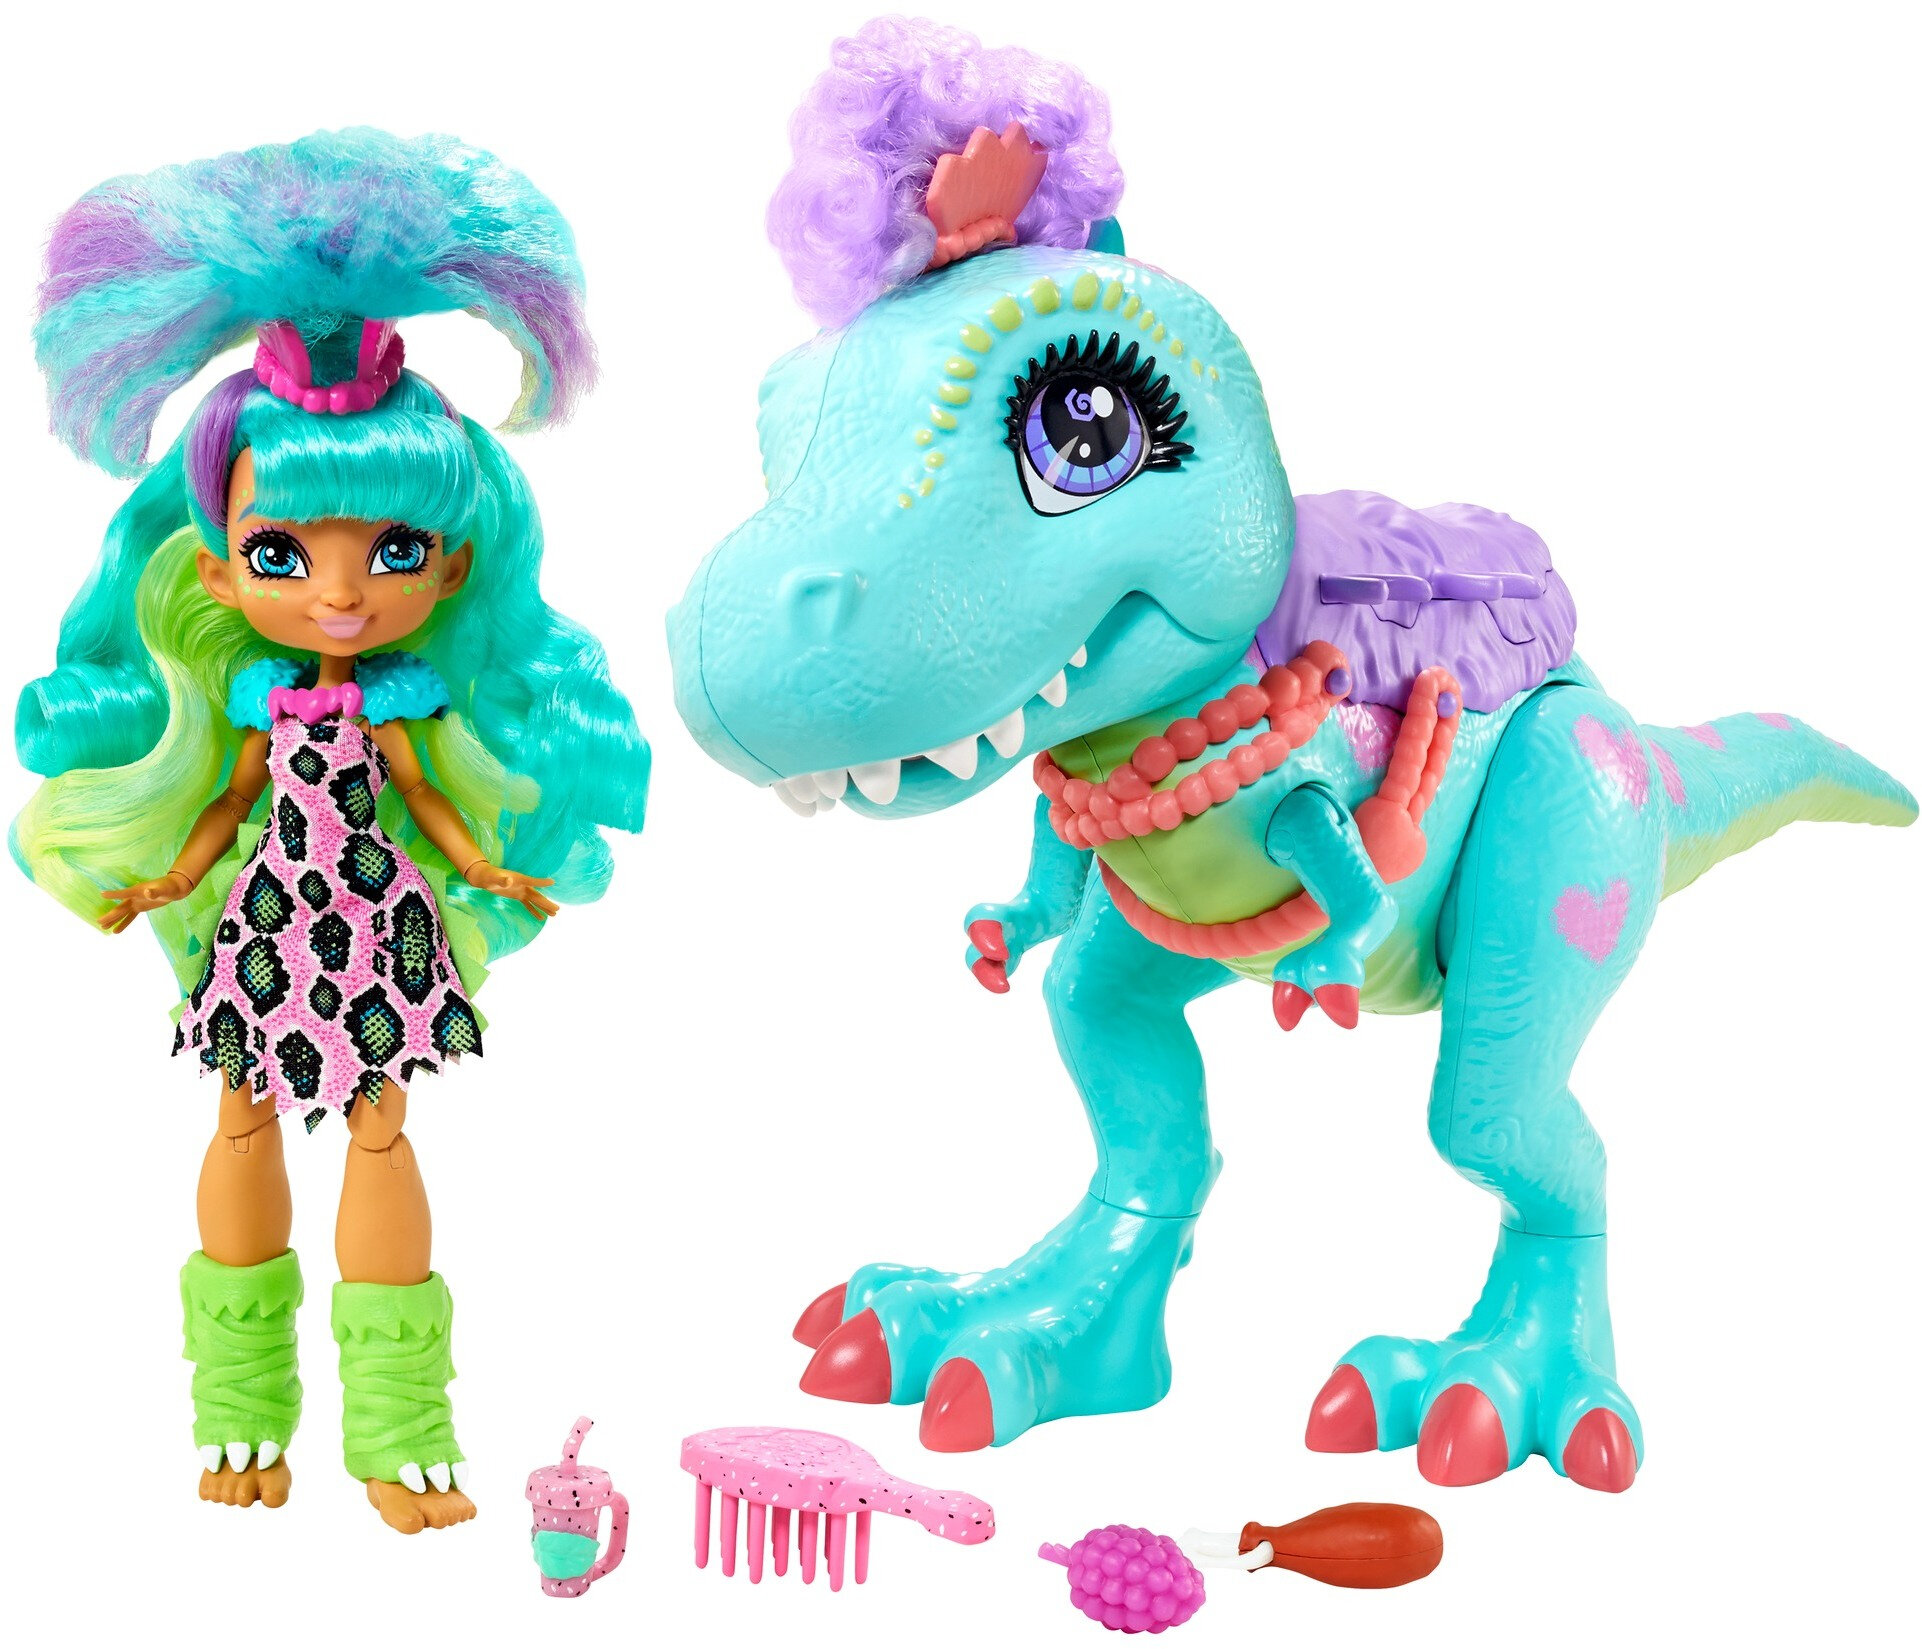 Cave Club Rockelle Doll And Tyrasaurus Dinosaur Playset, For 4 Year Olds And Up - image 1 of 9